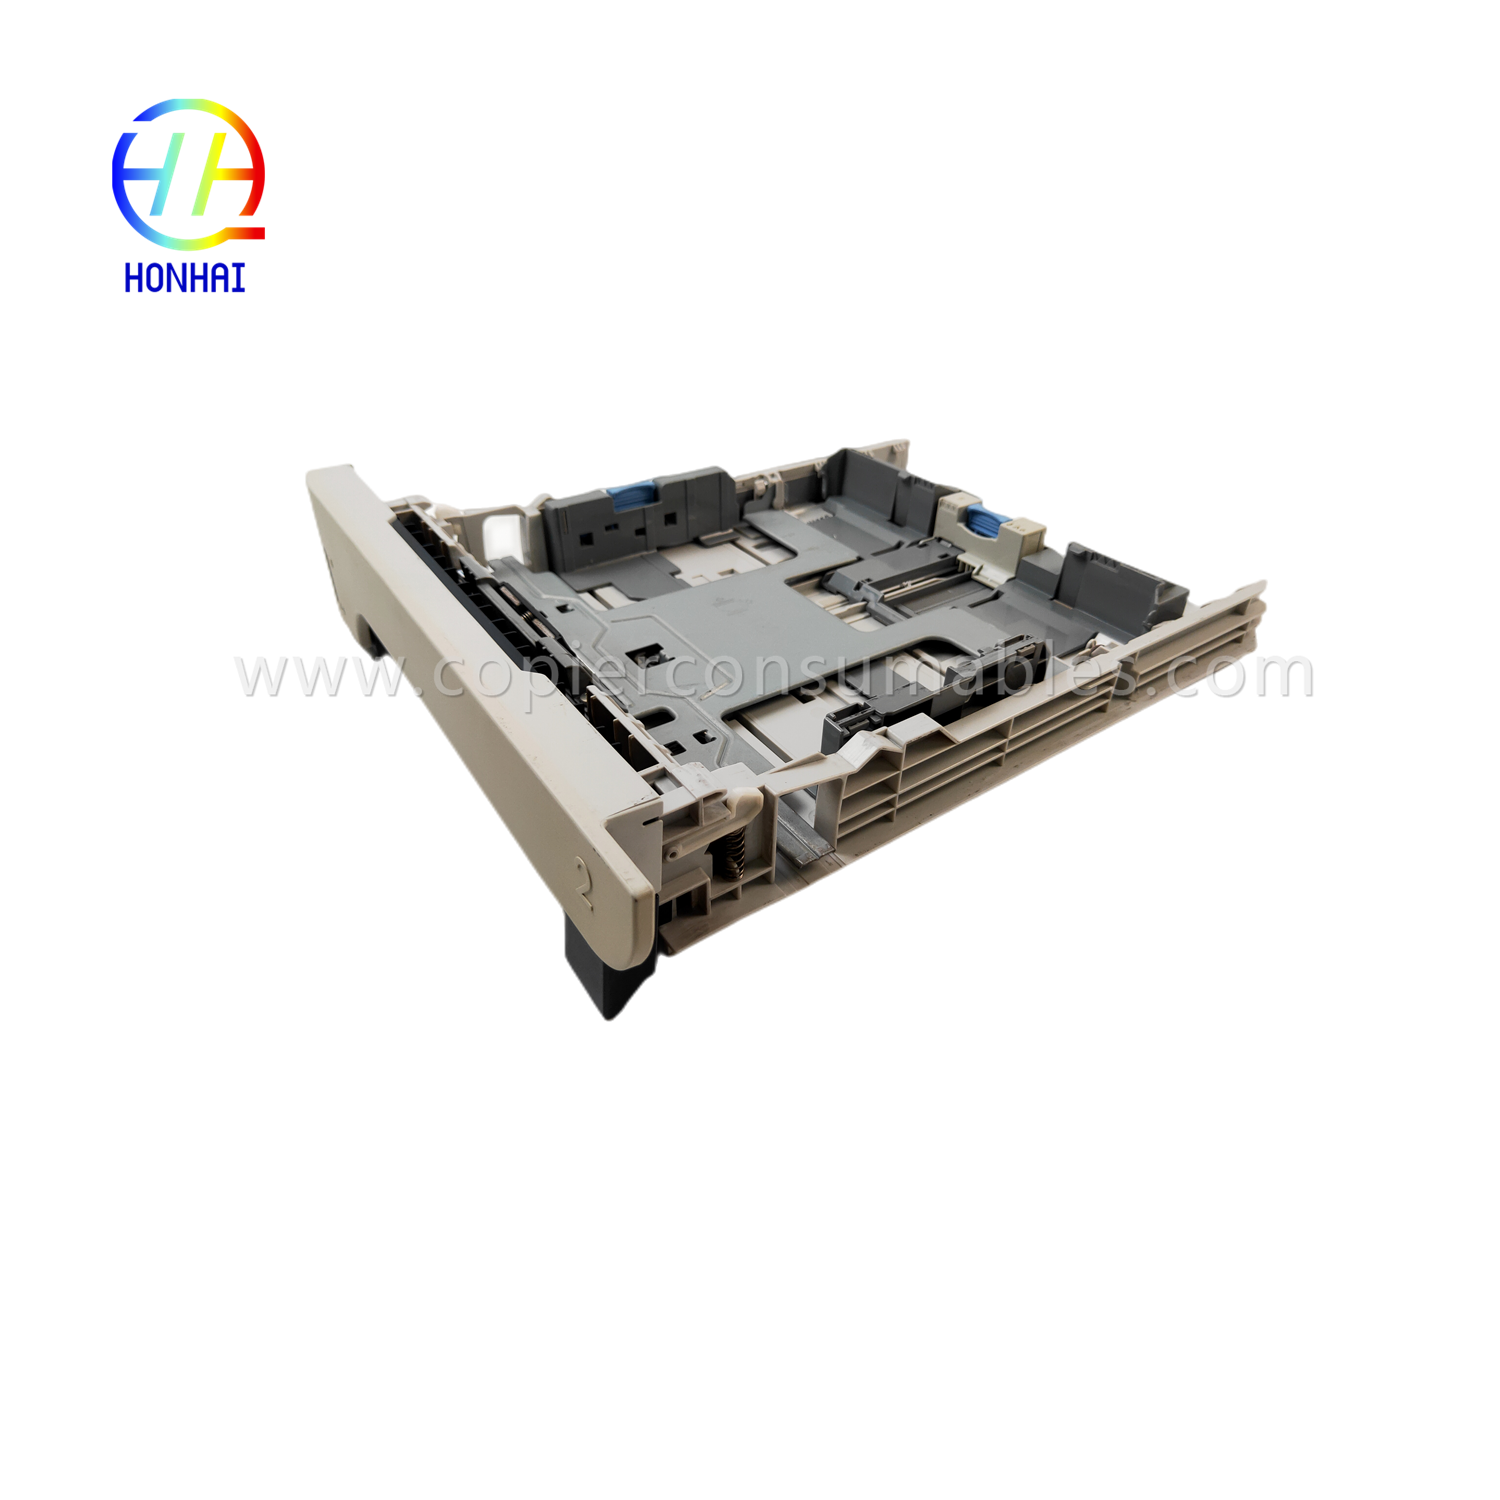 https://c585.goodao.net/paper-tray-assembly-for-xerox-phaser-3320dni-workcentre-3315dn-3325dni-050n00650